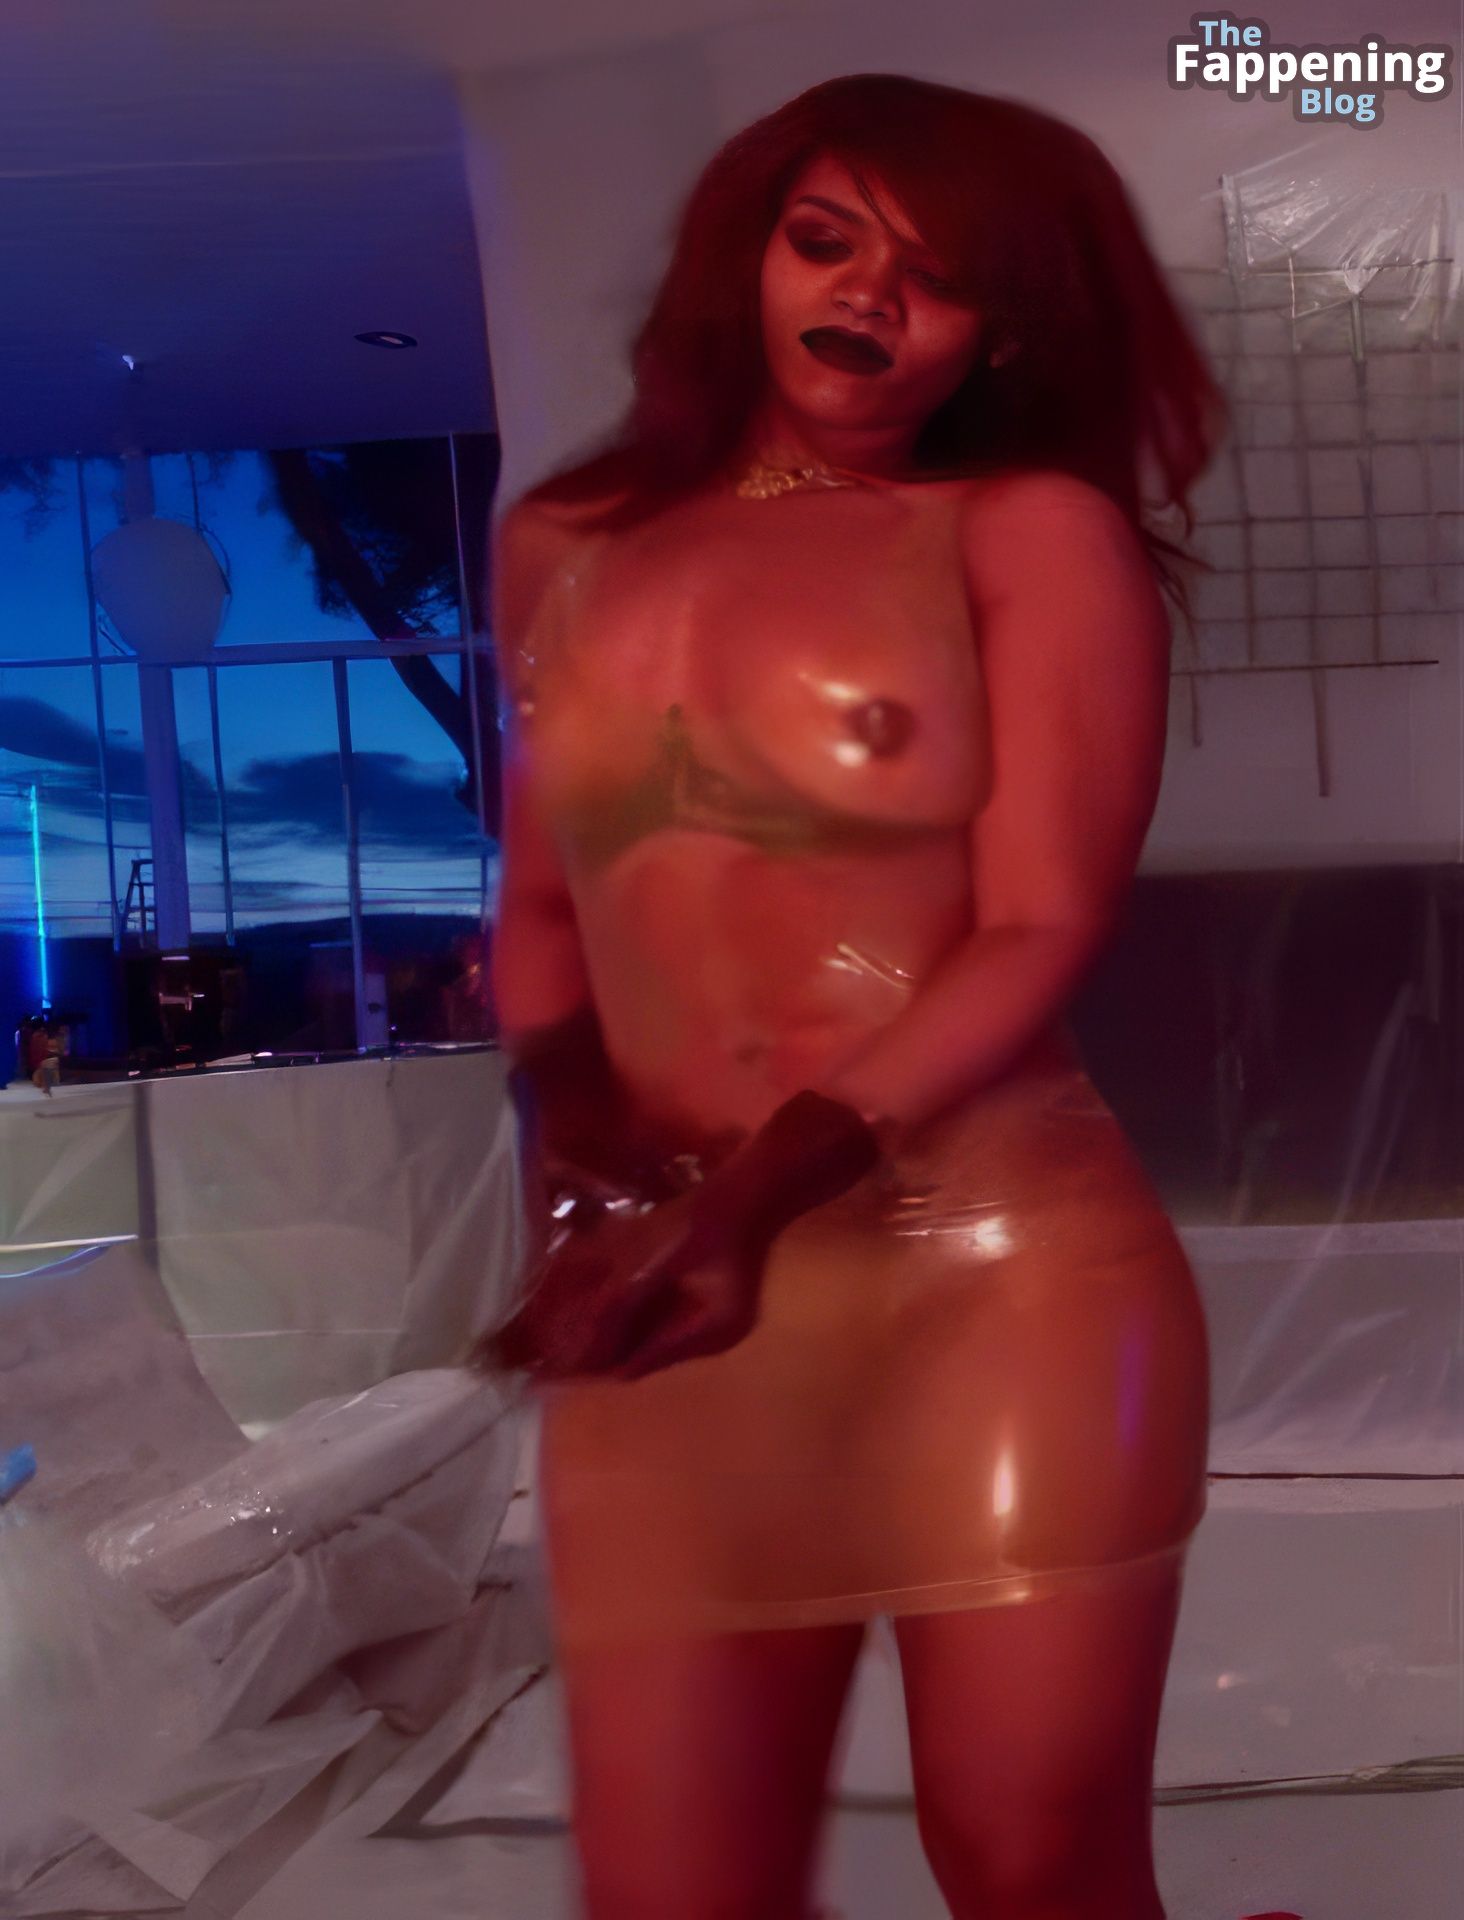 rihanna-breasts-nipples-exposed-video-outtakes-6-2.jpg